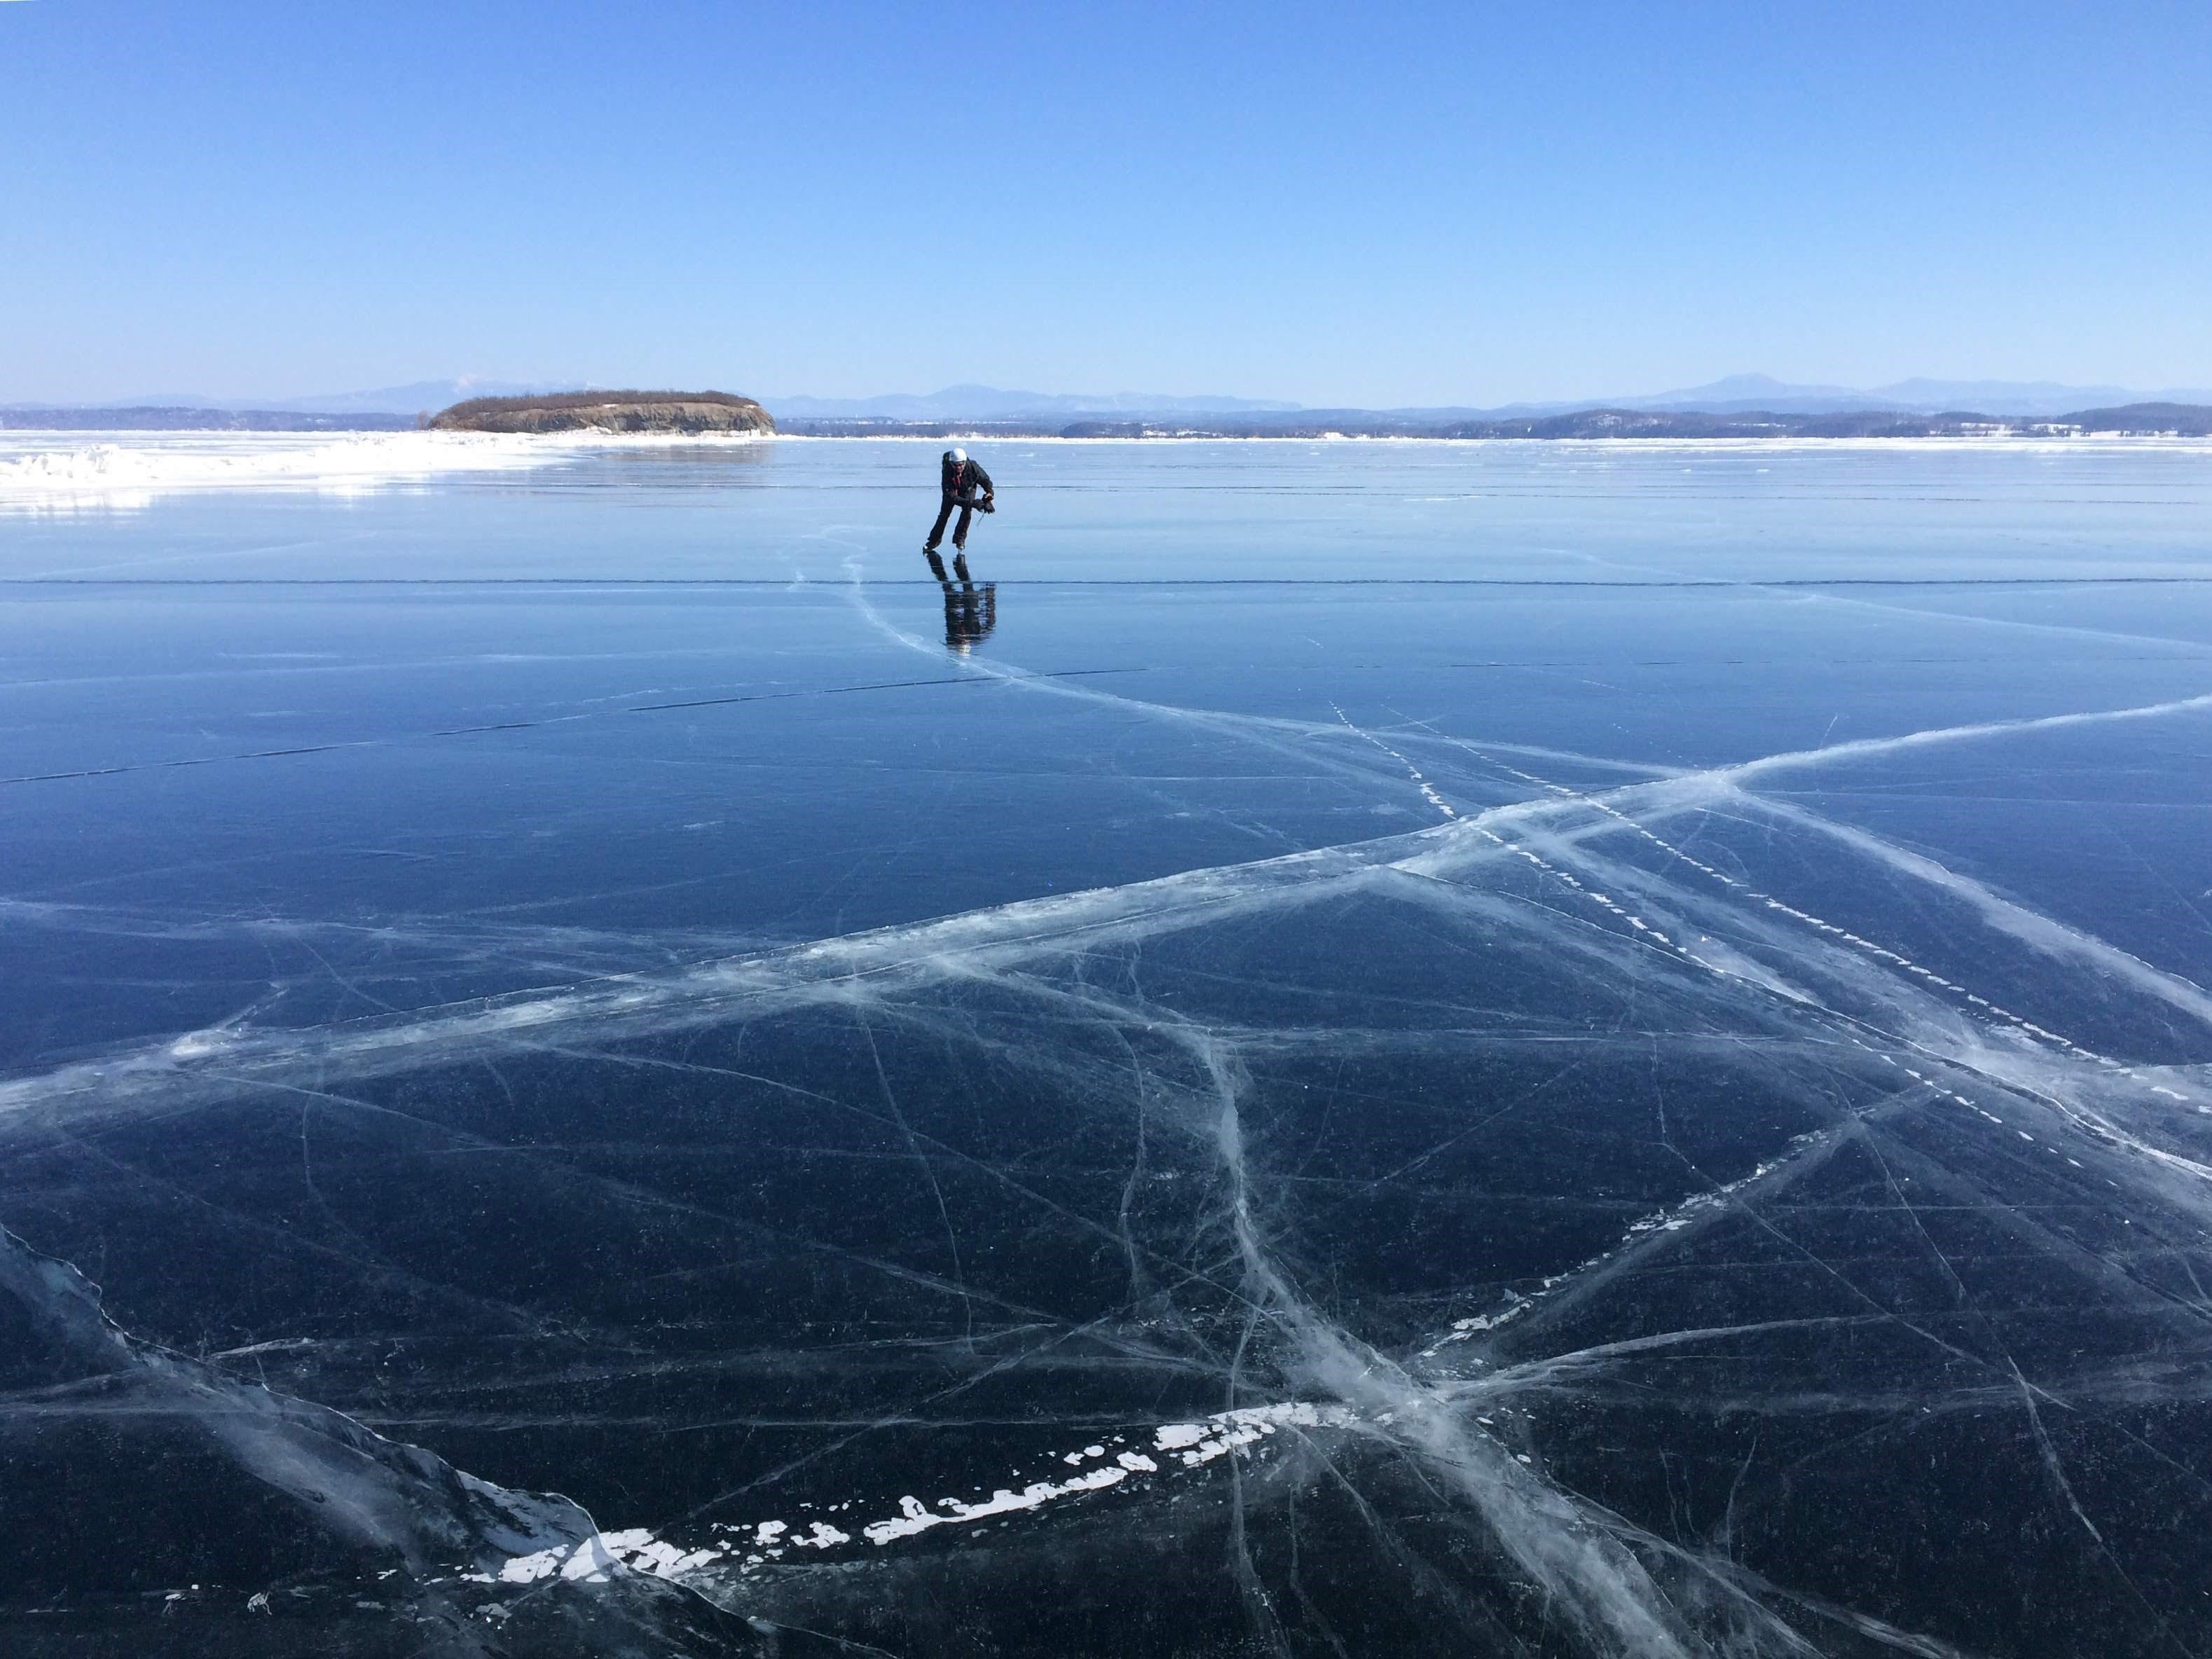 For These People A Frozen Lake Champlain Means One Giant Ice Rink